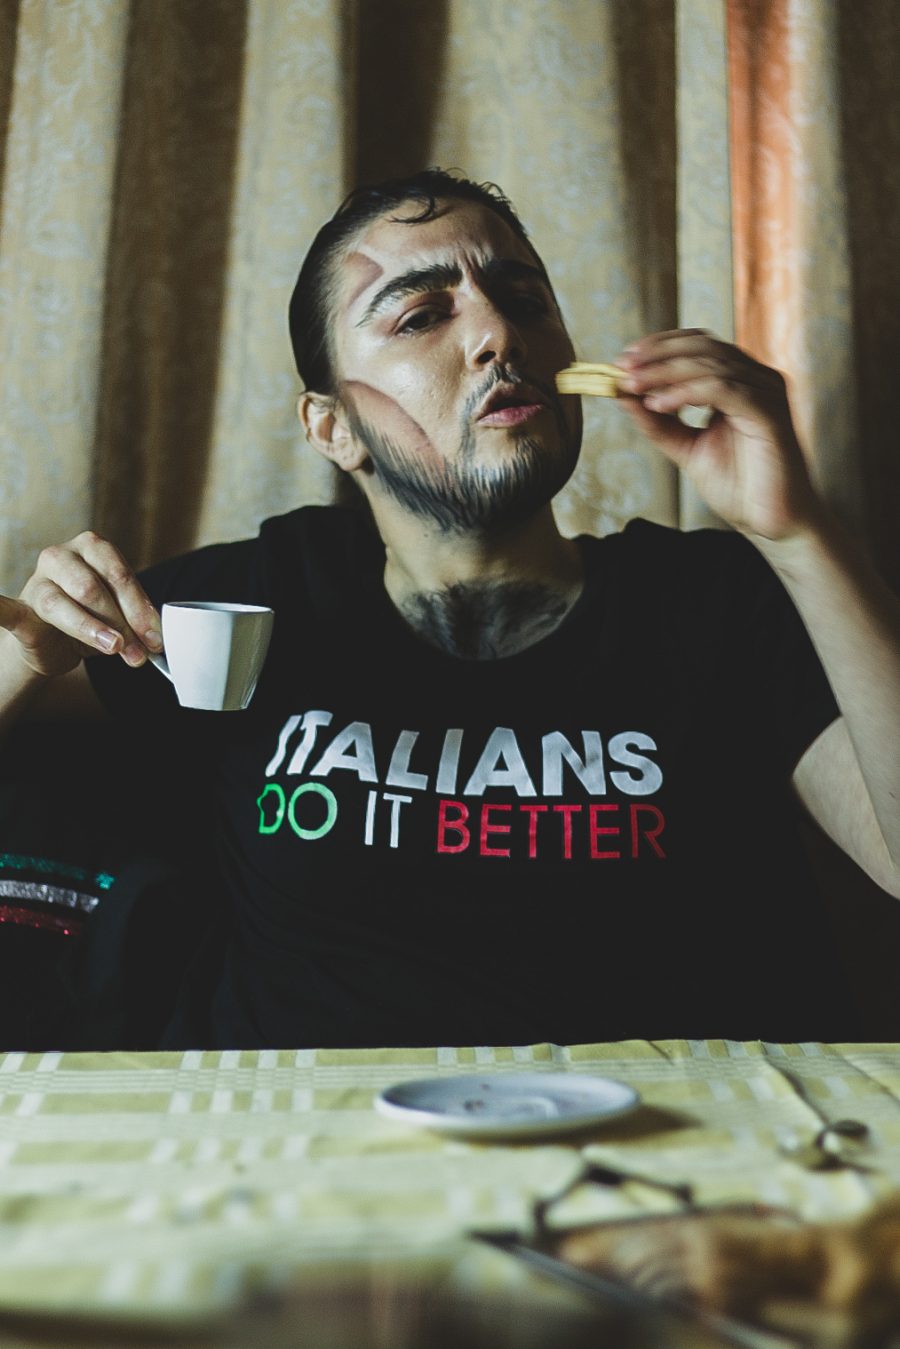 The author in drag as Bruno Salsicce. They're a drag king sitting at a table holding a small espresso cup and eating a biscuit. They have slicked hair, chest and facial hair, drag king makeup and their shirt says "Italians do it better"